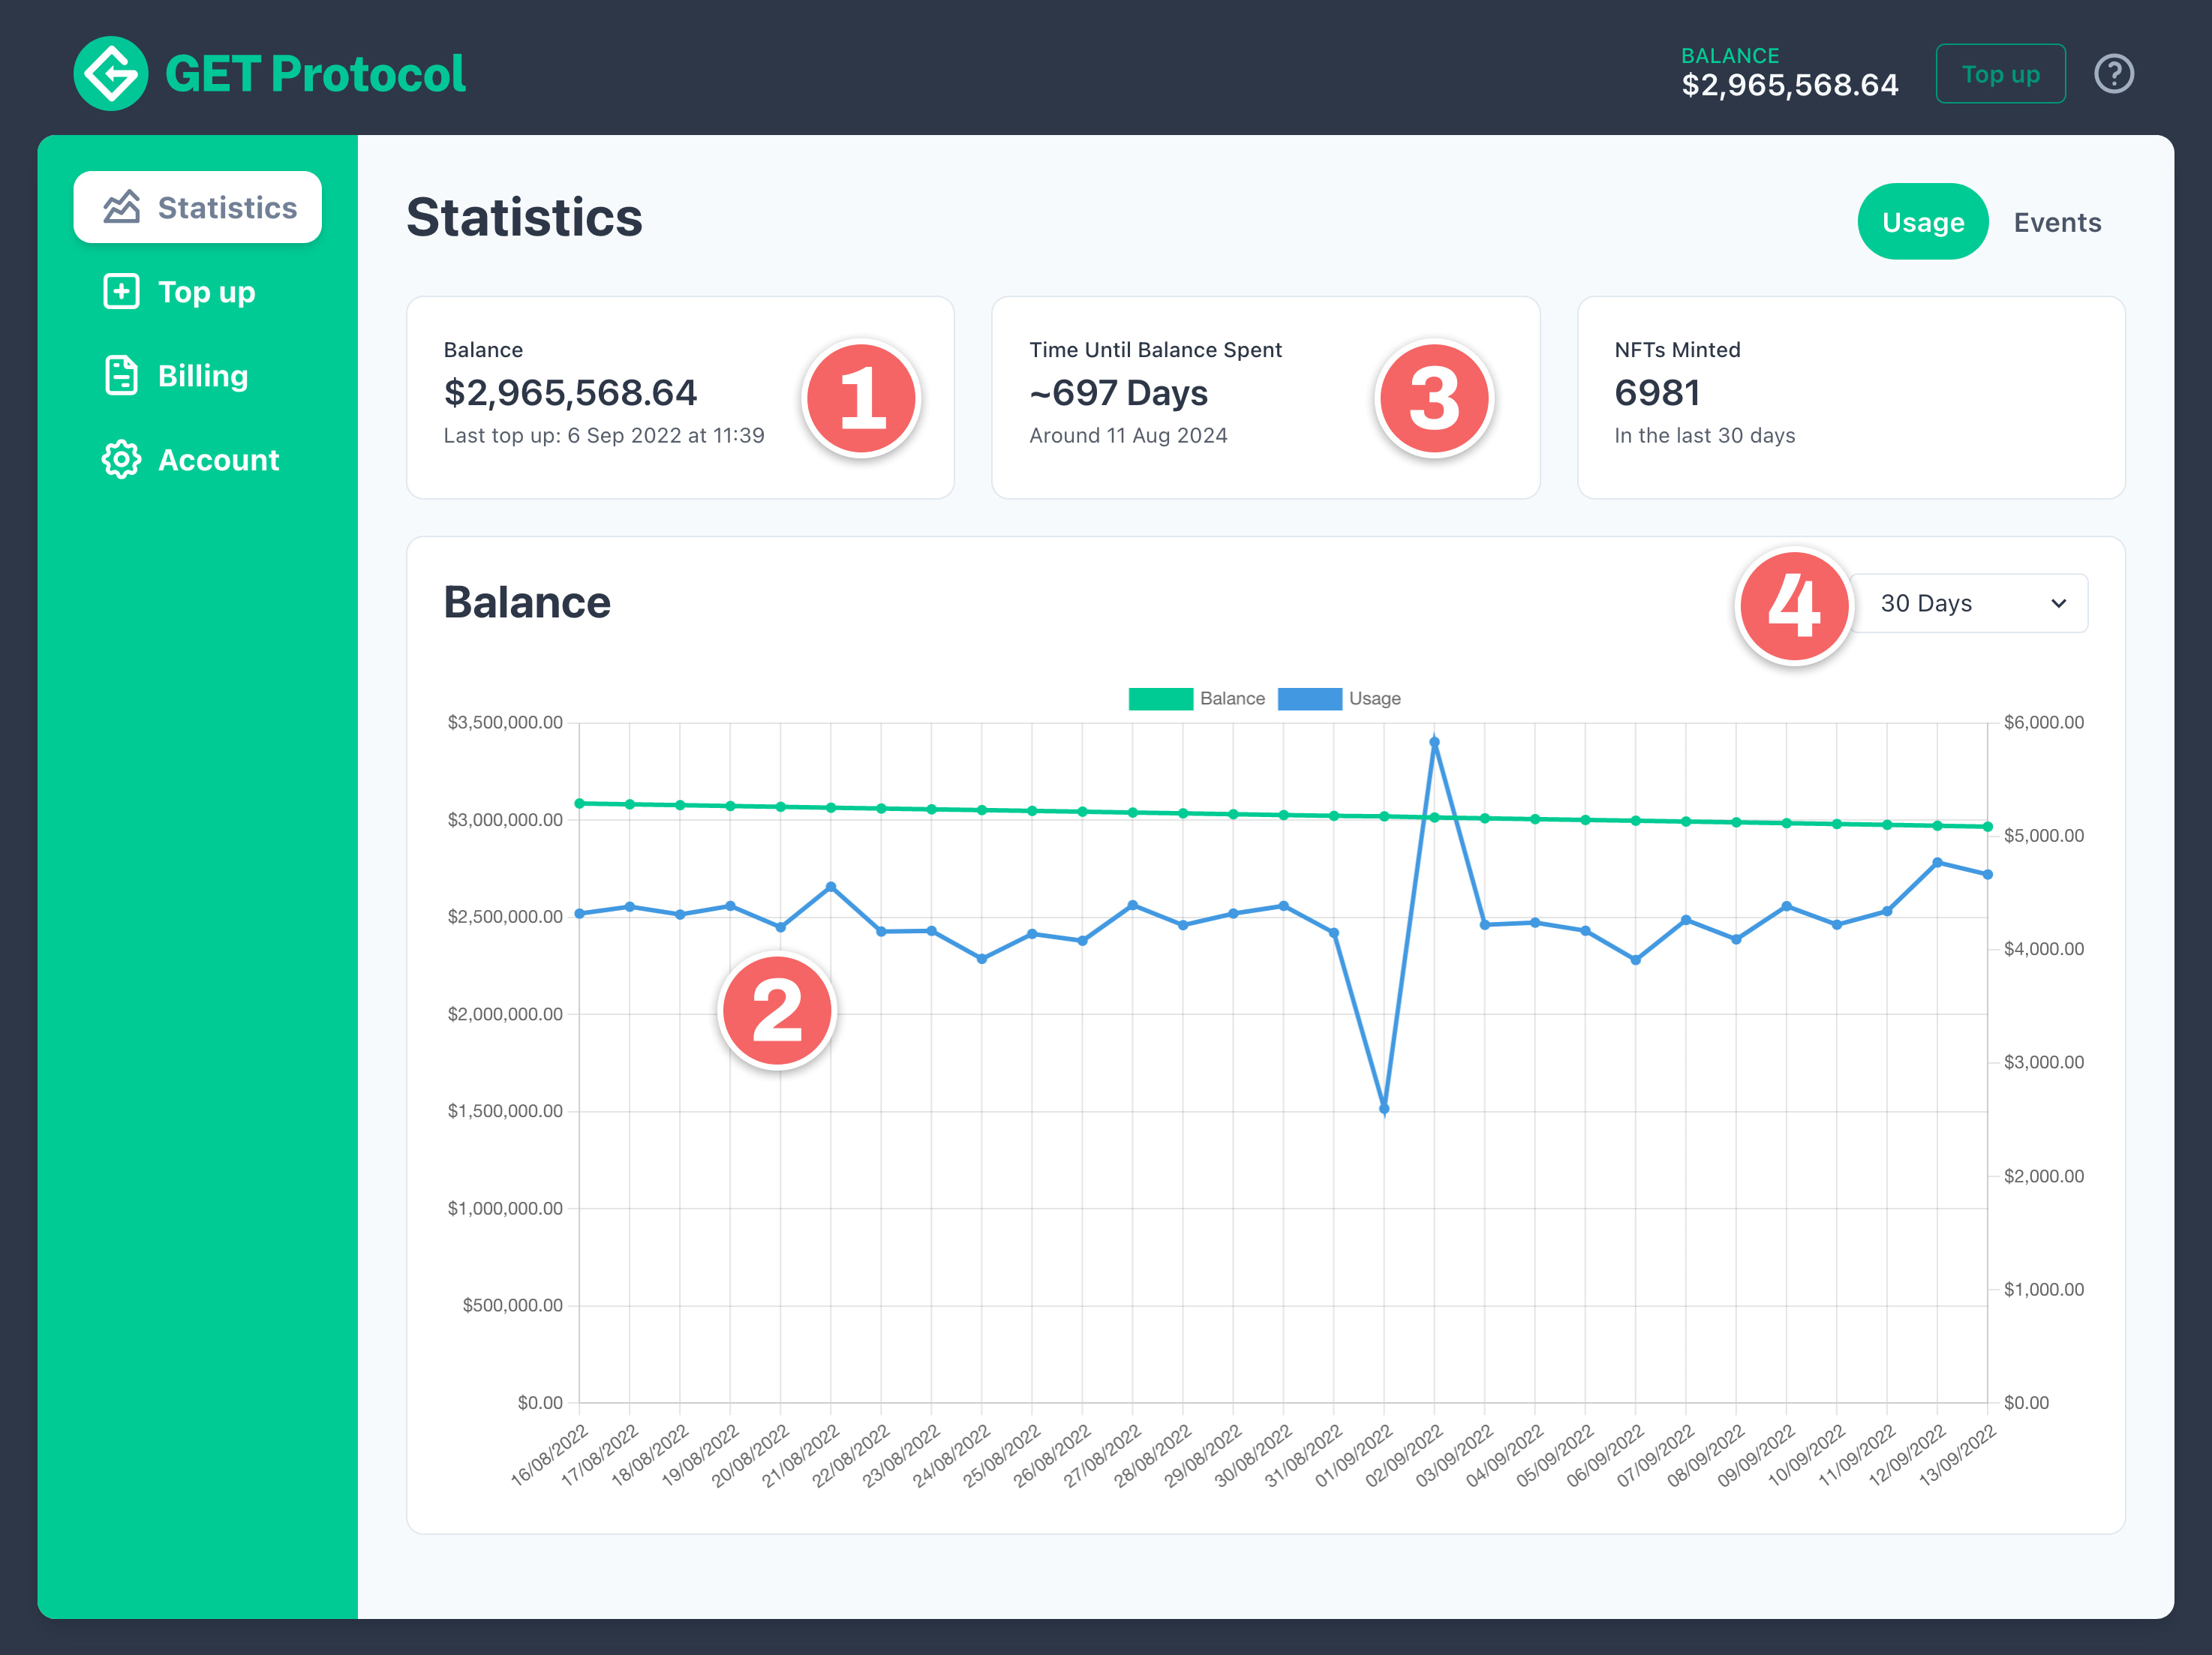 View daily usage charts to track your account balance over time.